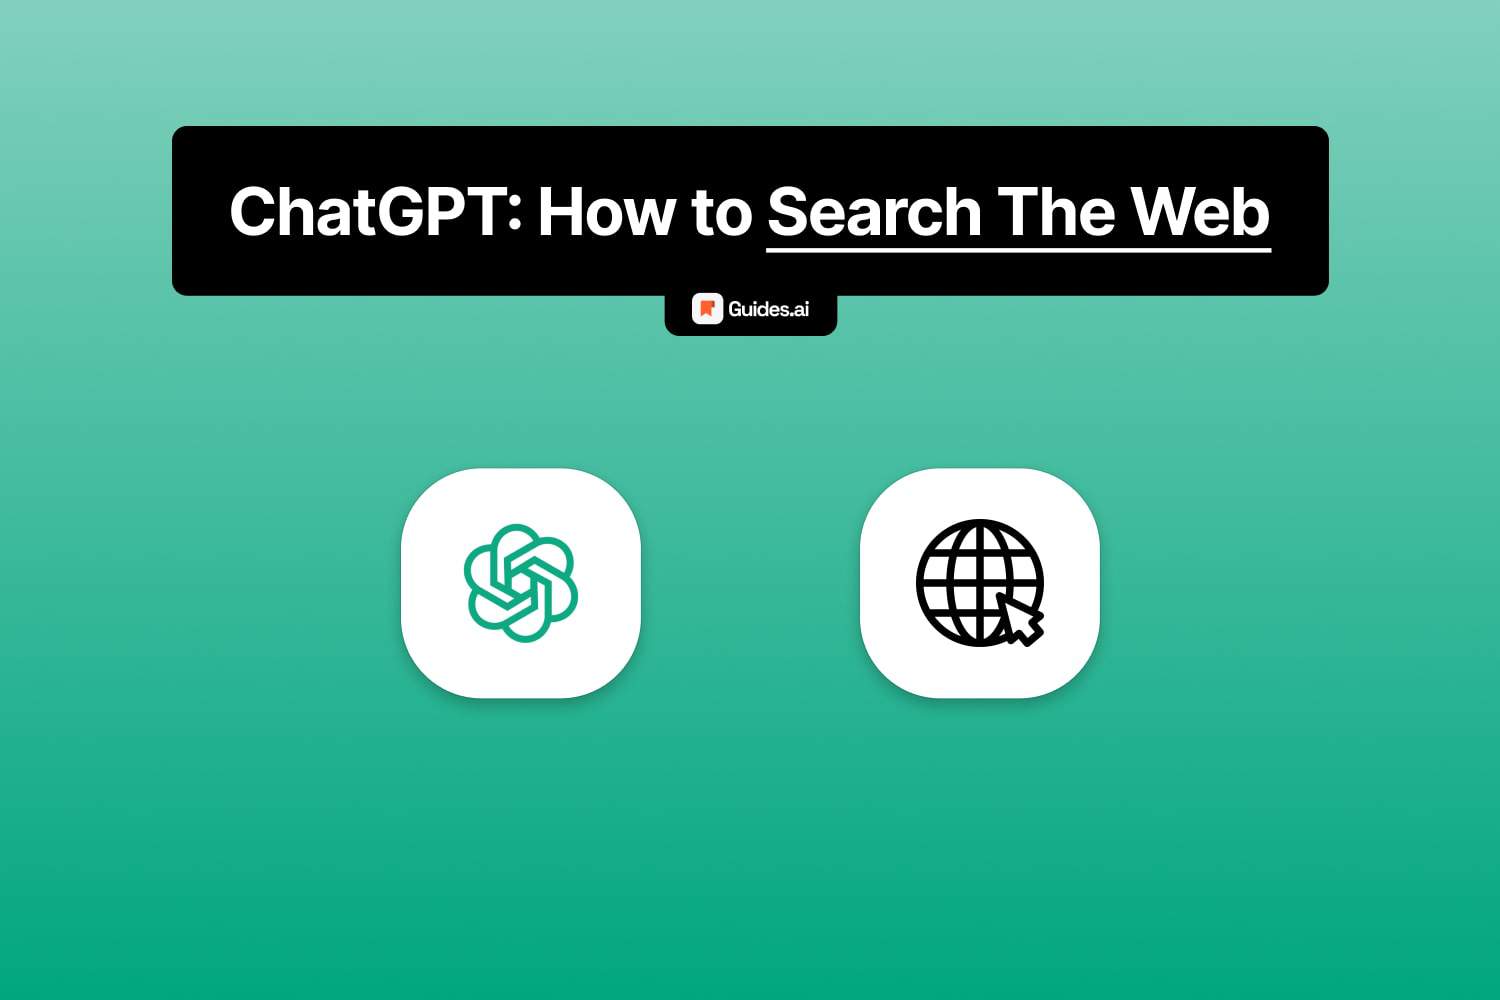 How to search the web with ChatGPT